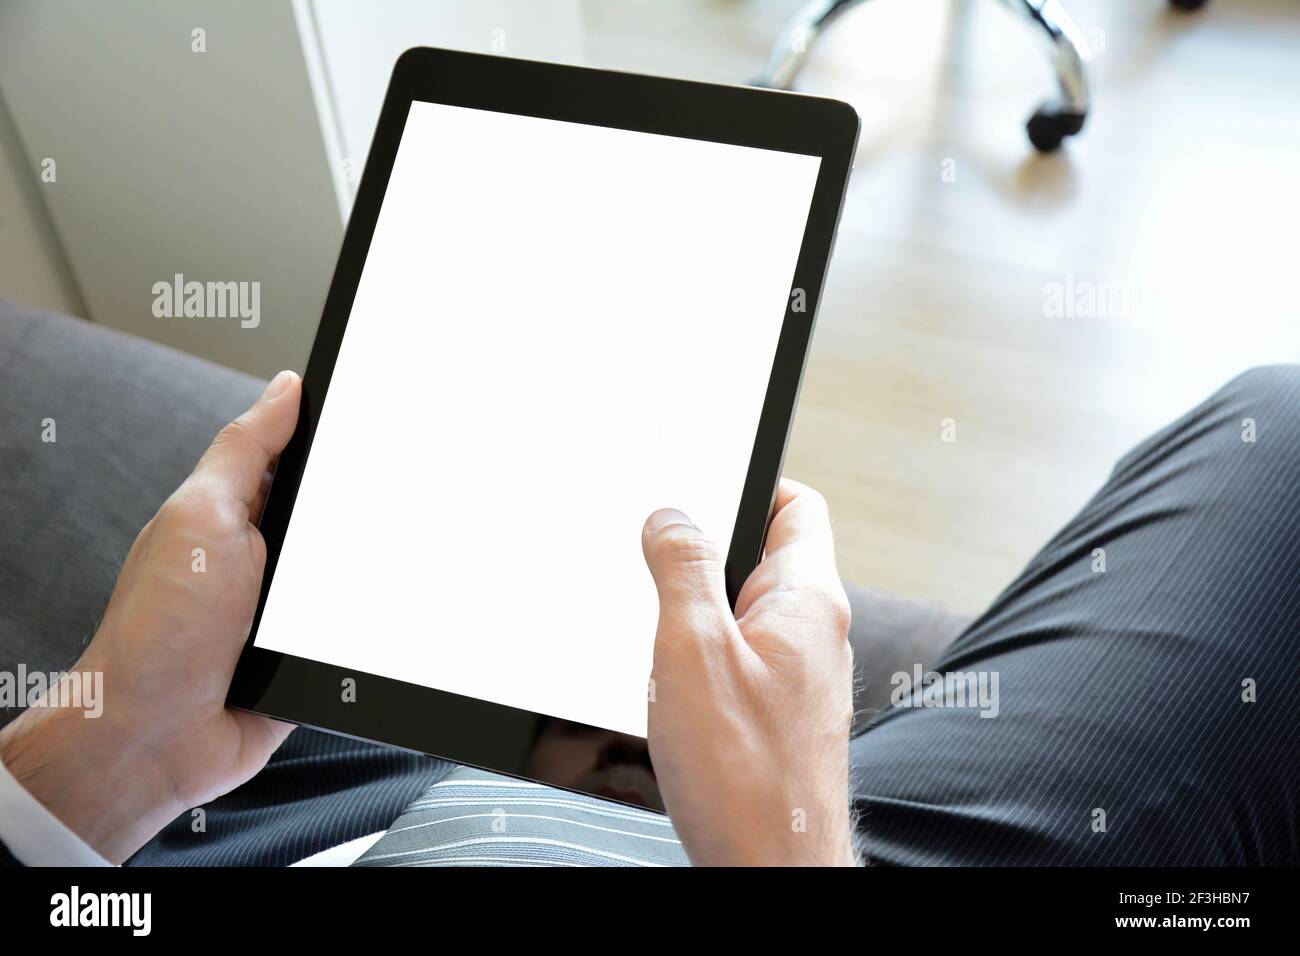 Hands holding tablet pc with empty screen Stock Photo